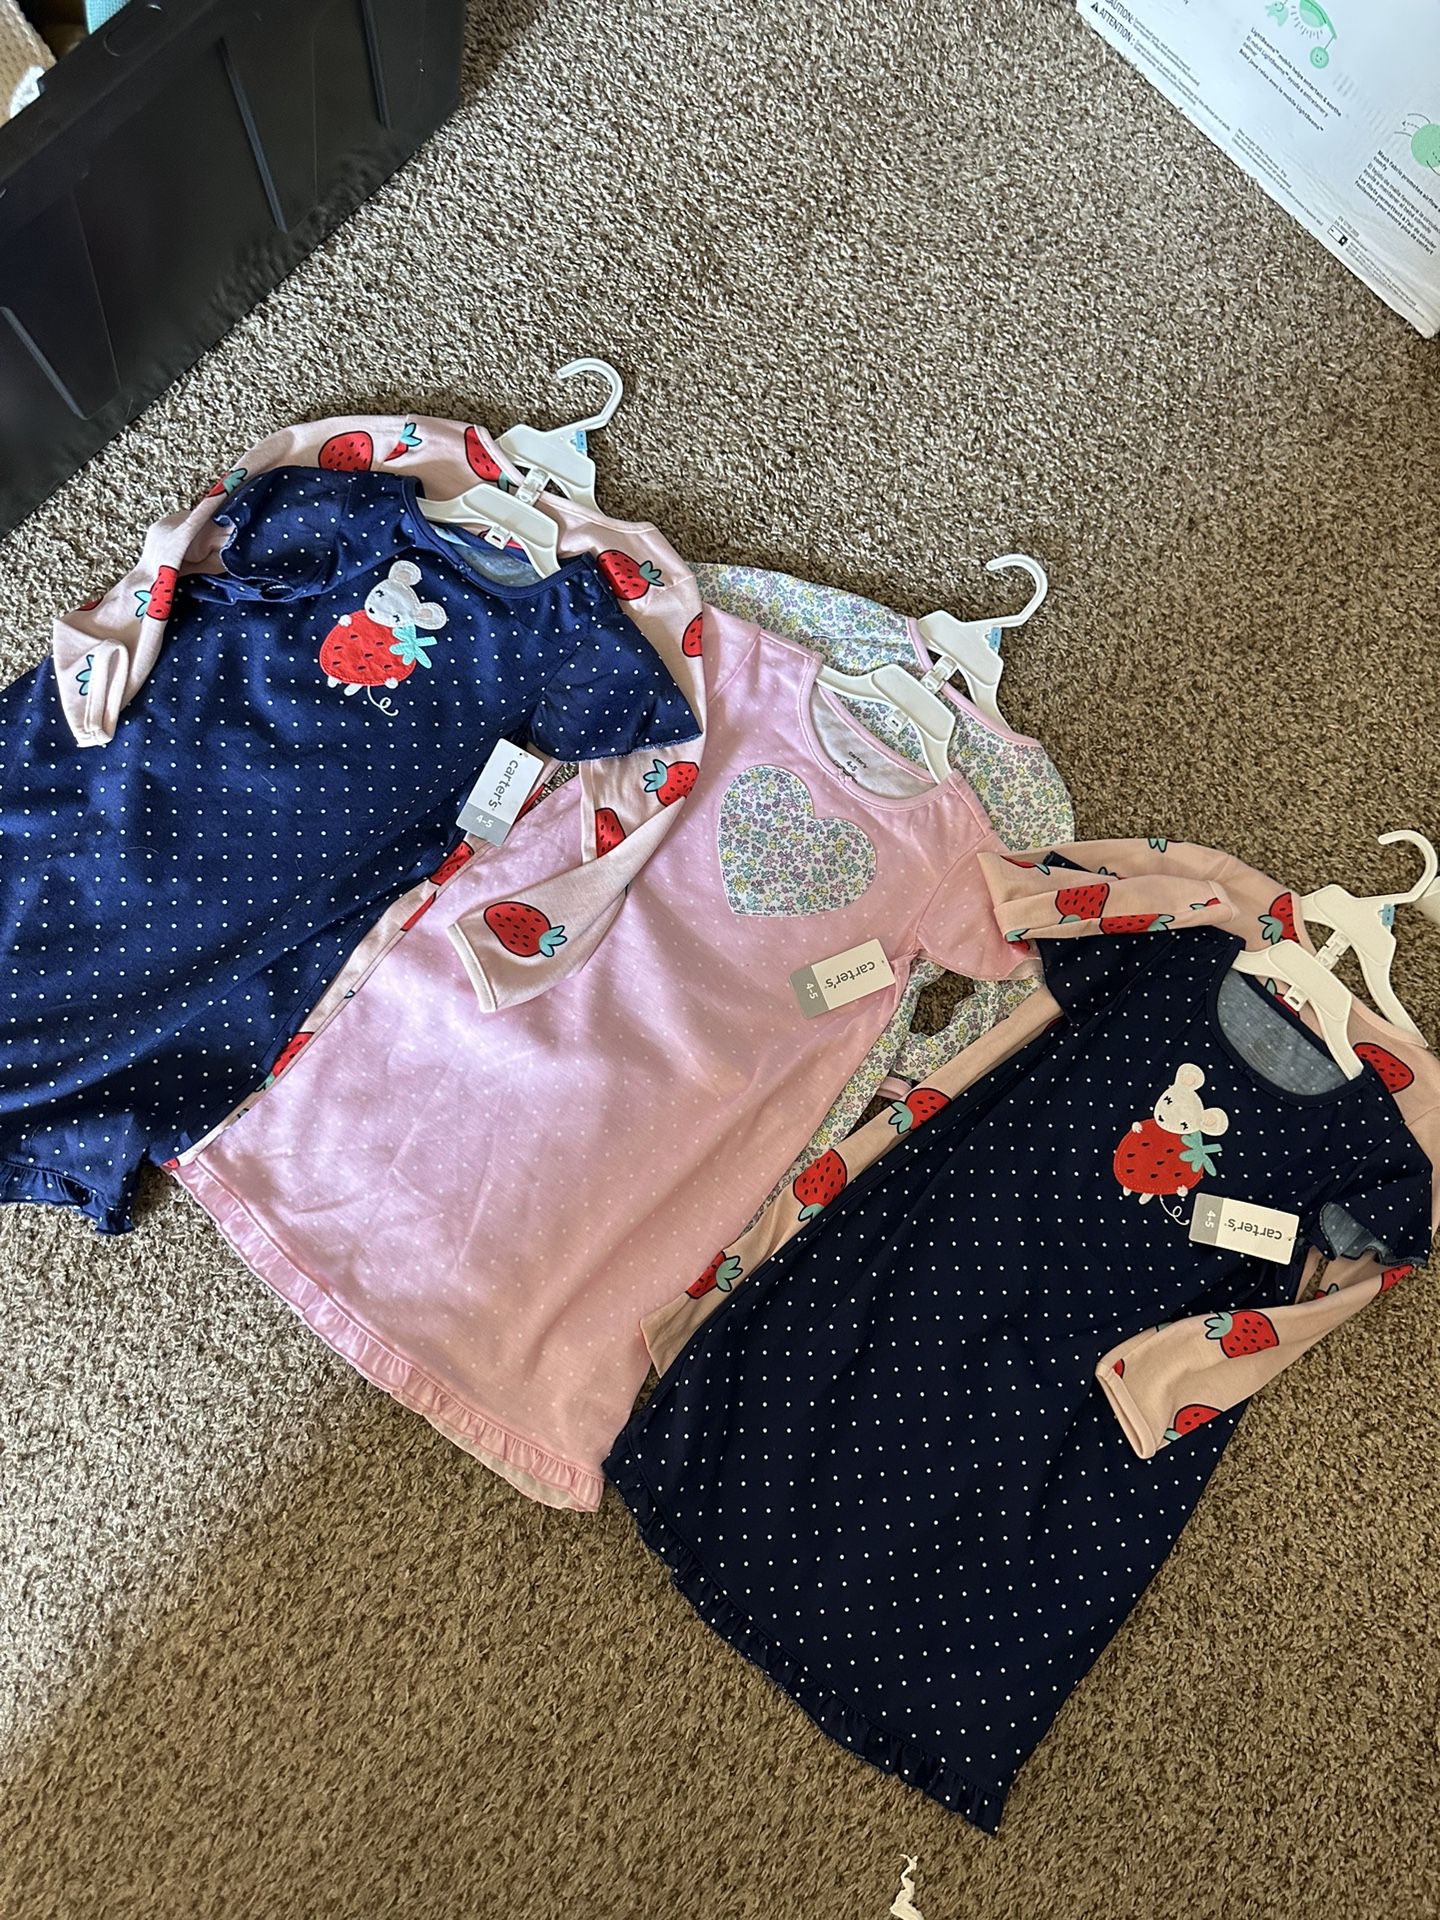 Toddler XS (4/5) Nightgown Sets (6 Total Gowns)New All Sets For $20